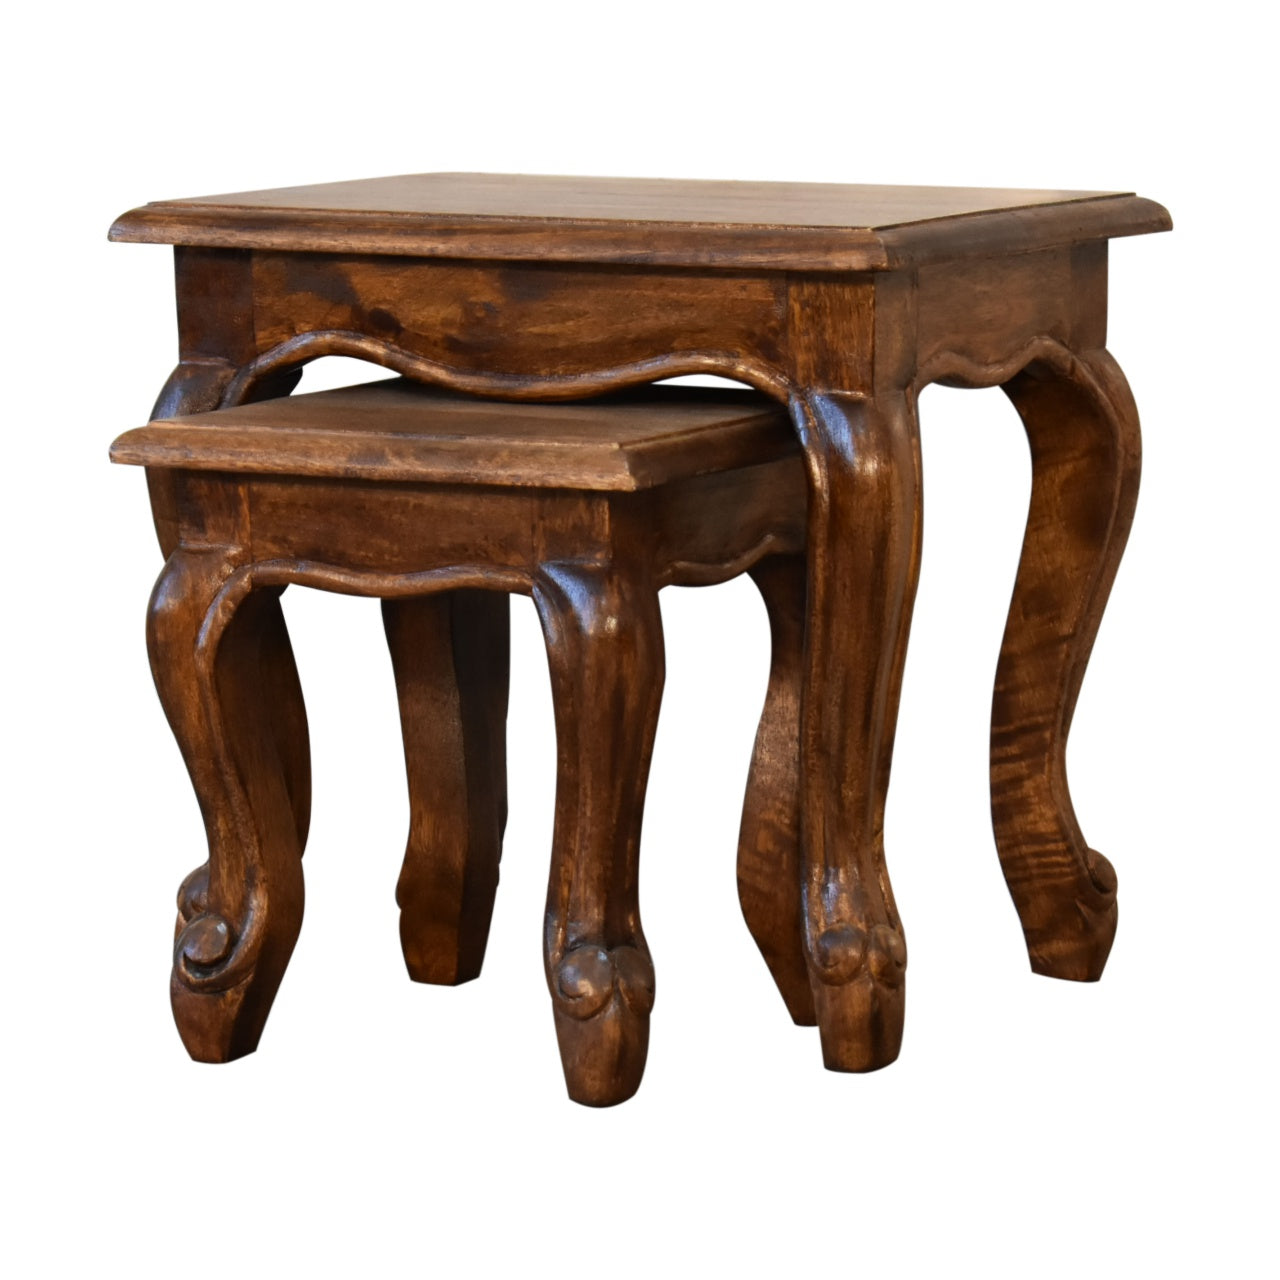 Chestnut French Style 2 Stool Set Two Small Tables Solid Mango Wood - CasaFenix